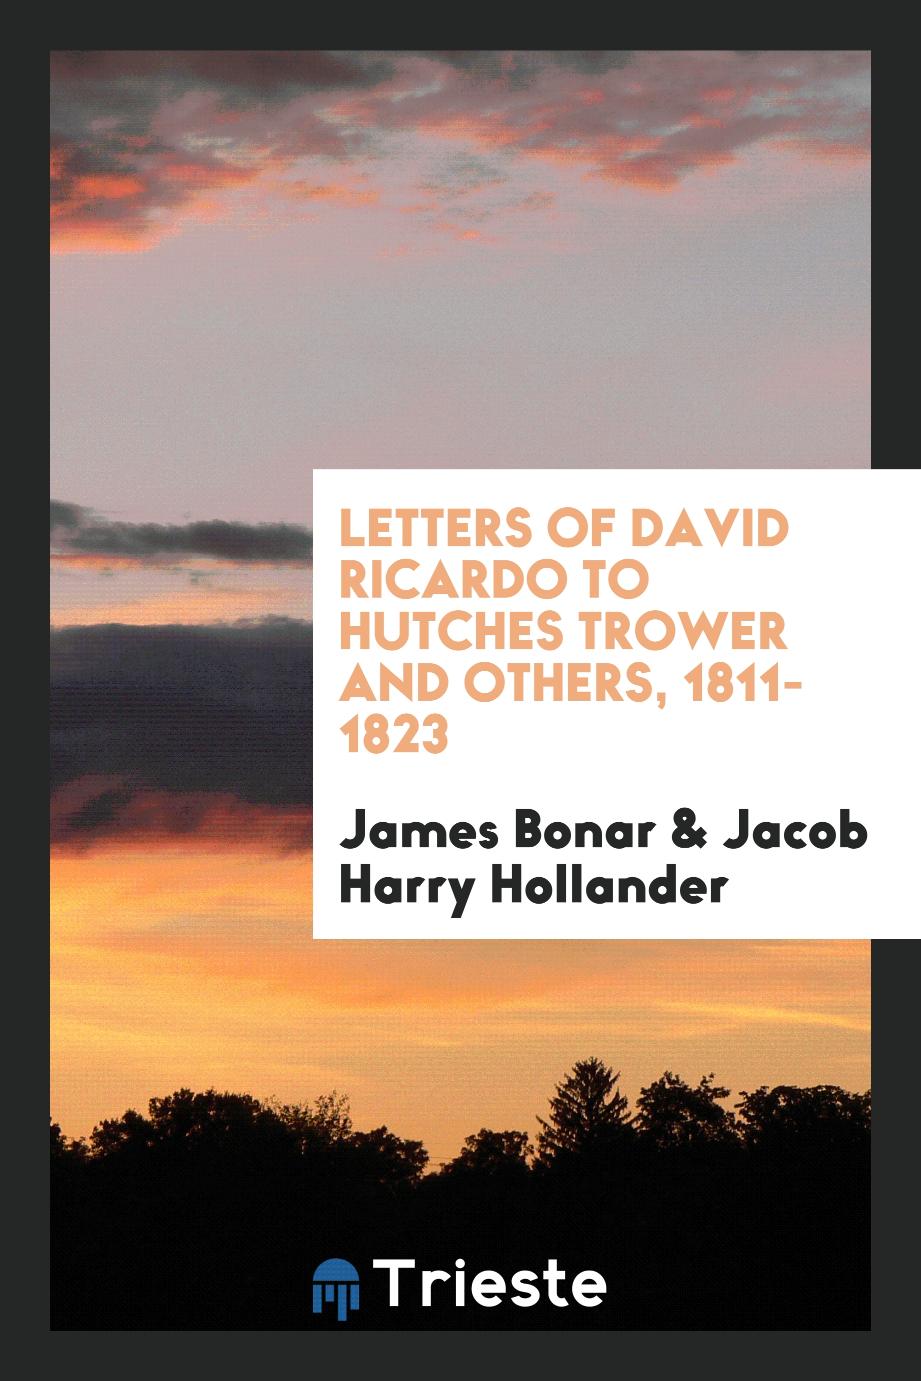 Letters of David Ricardo to Hutches Trower and others, 1811-1823